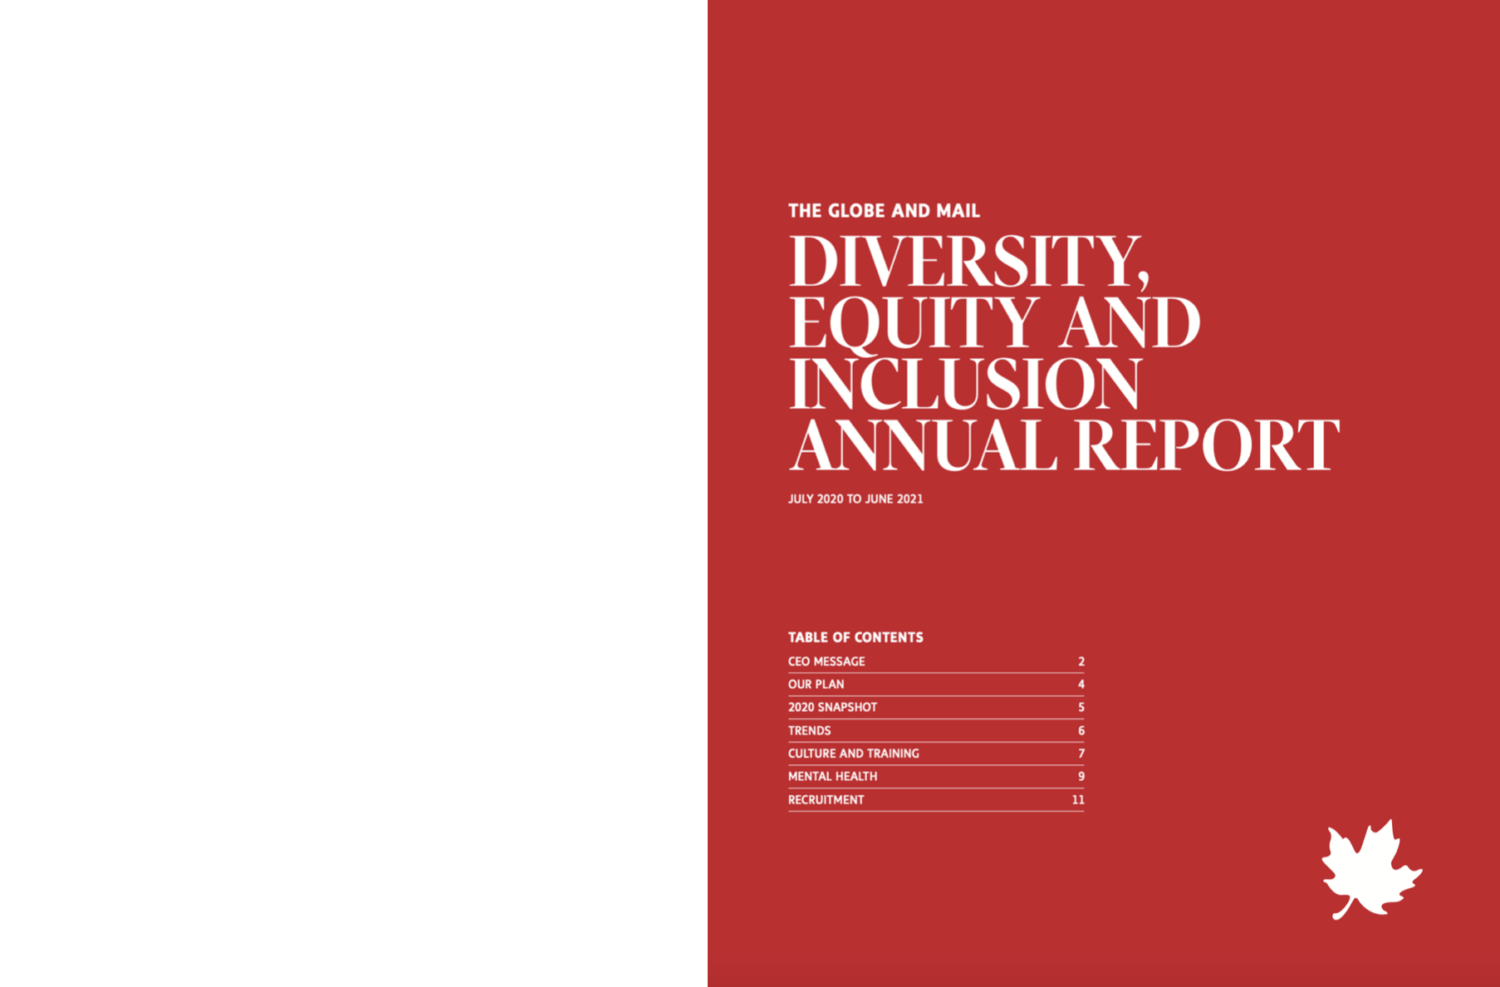 The Globe and Mail DEI Annual Report. Red background and white text reading: THE GLOBE AND MAIL DIVERSITY, EQUITY AND INCLUSION ANNUAL REPORT JULY 2020 TO JUNE 2021